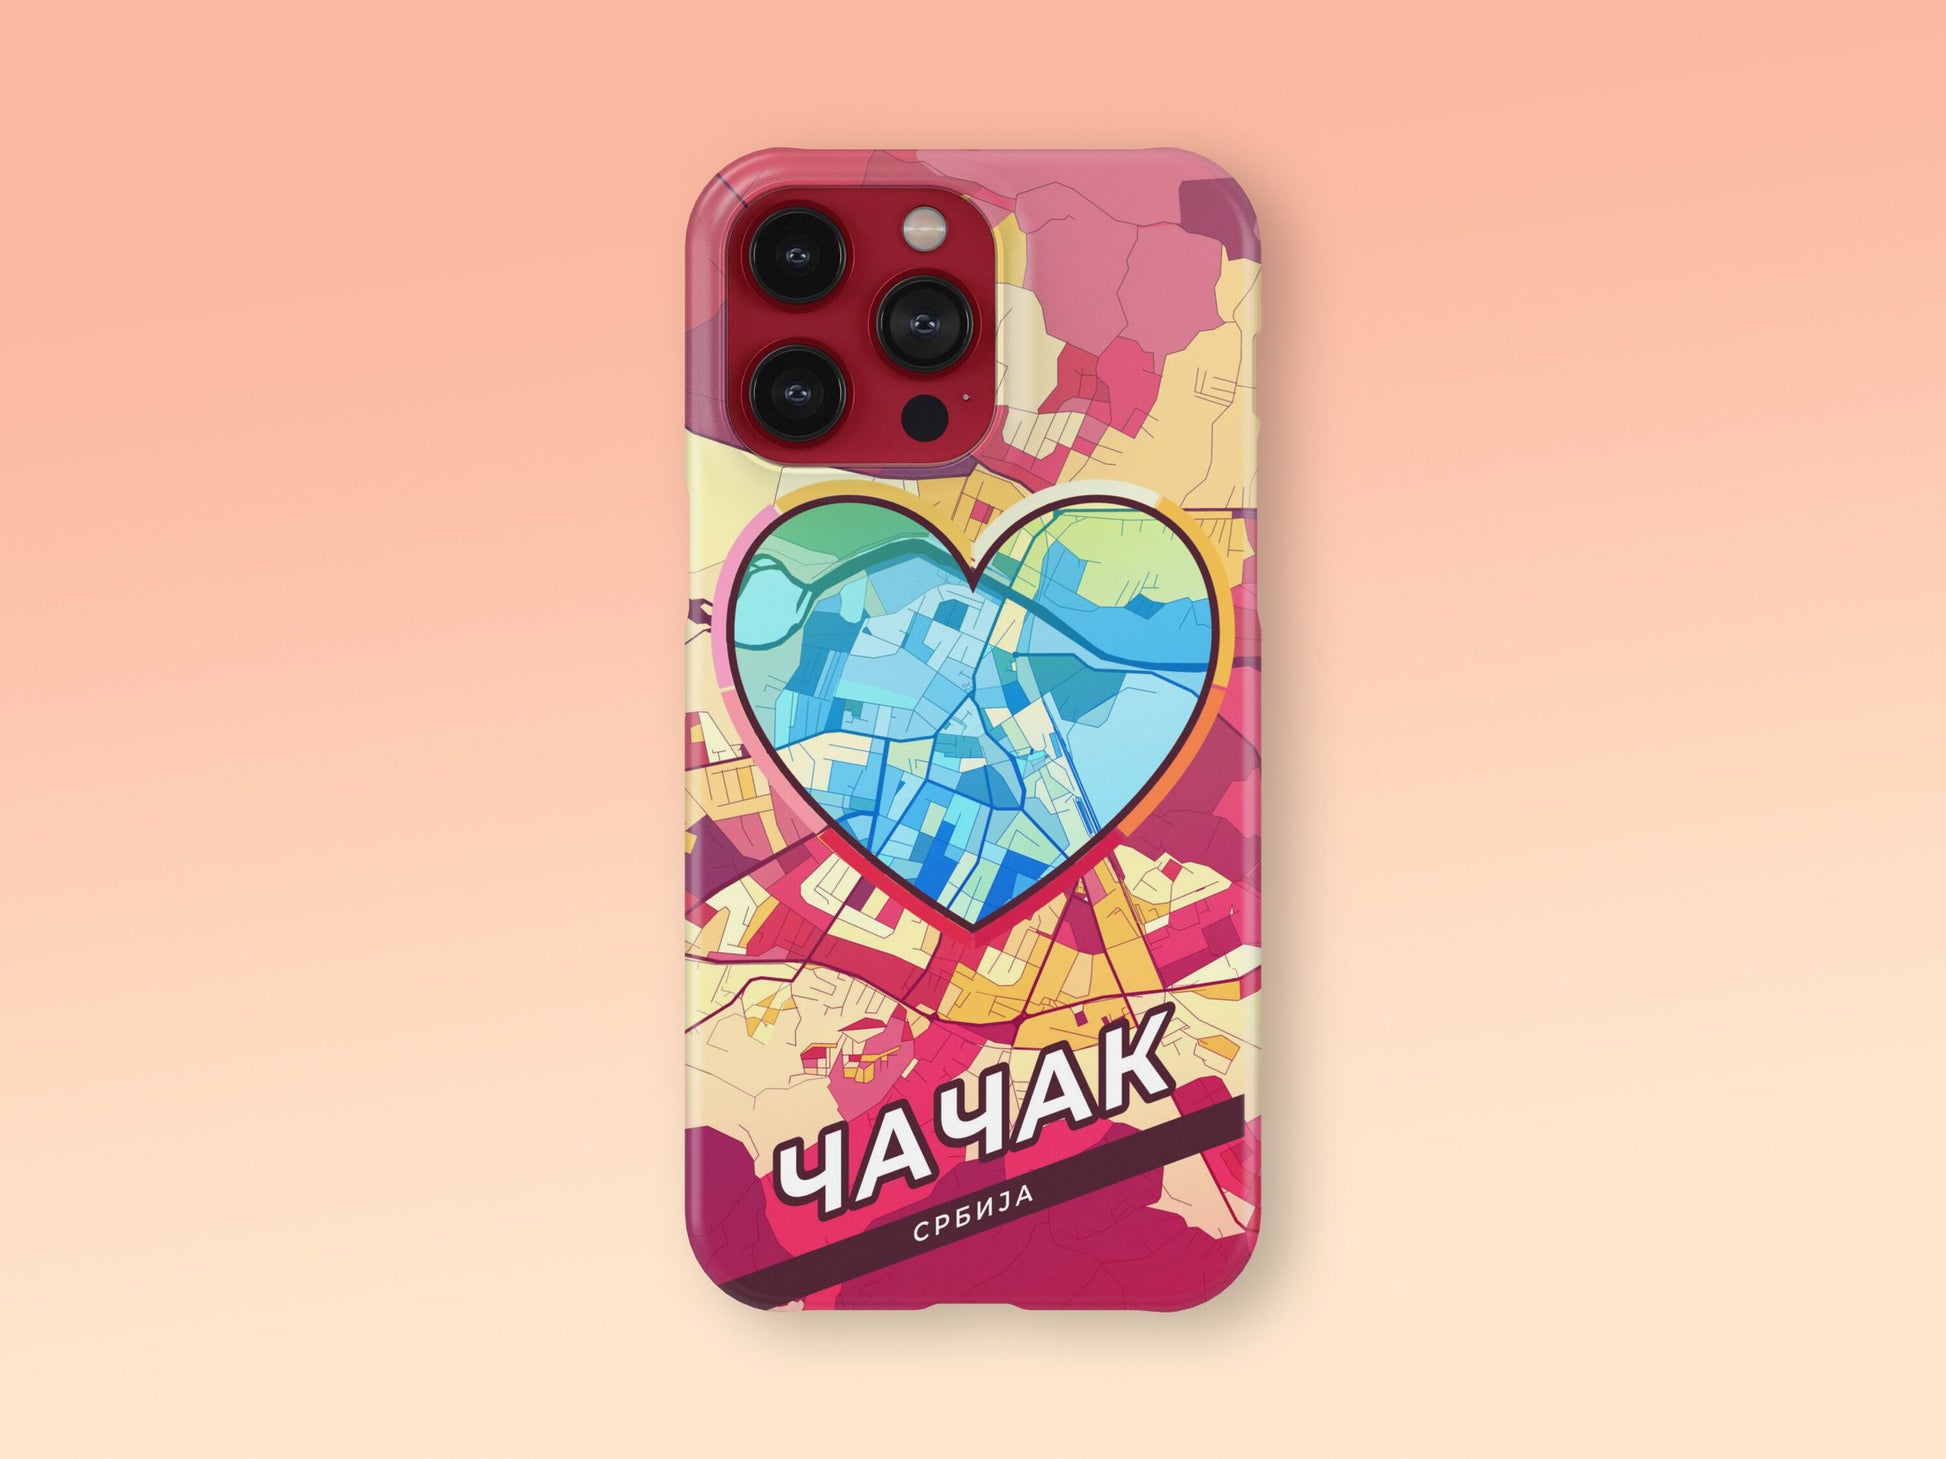 Čačak Serbia slim phone case with colorful icon. Birthday, wedding or housewarming gift. Couple match cases. 2